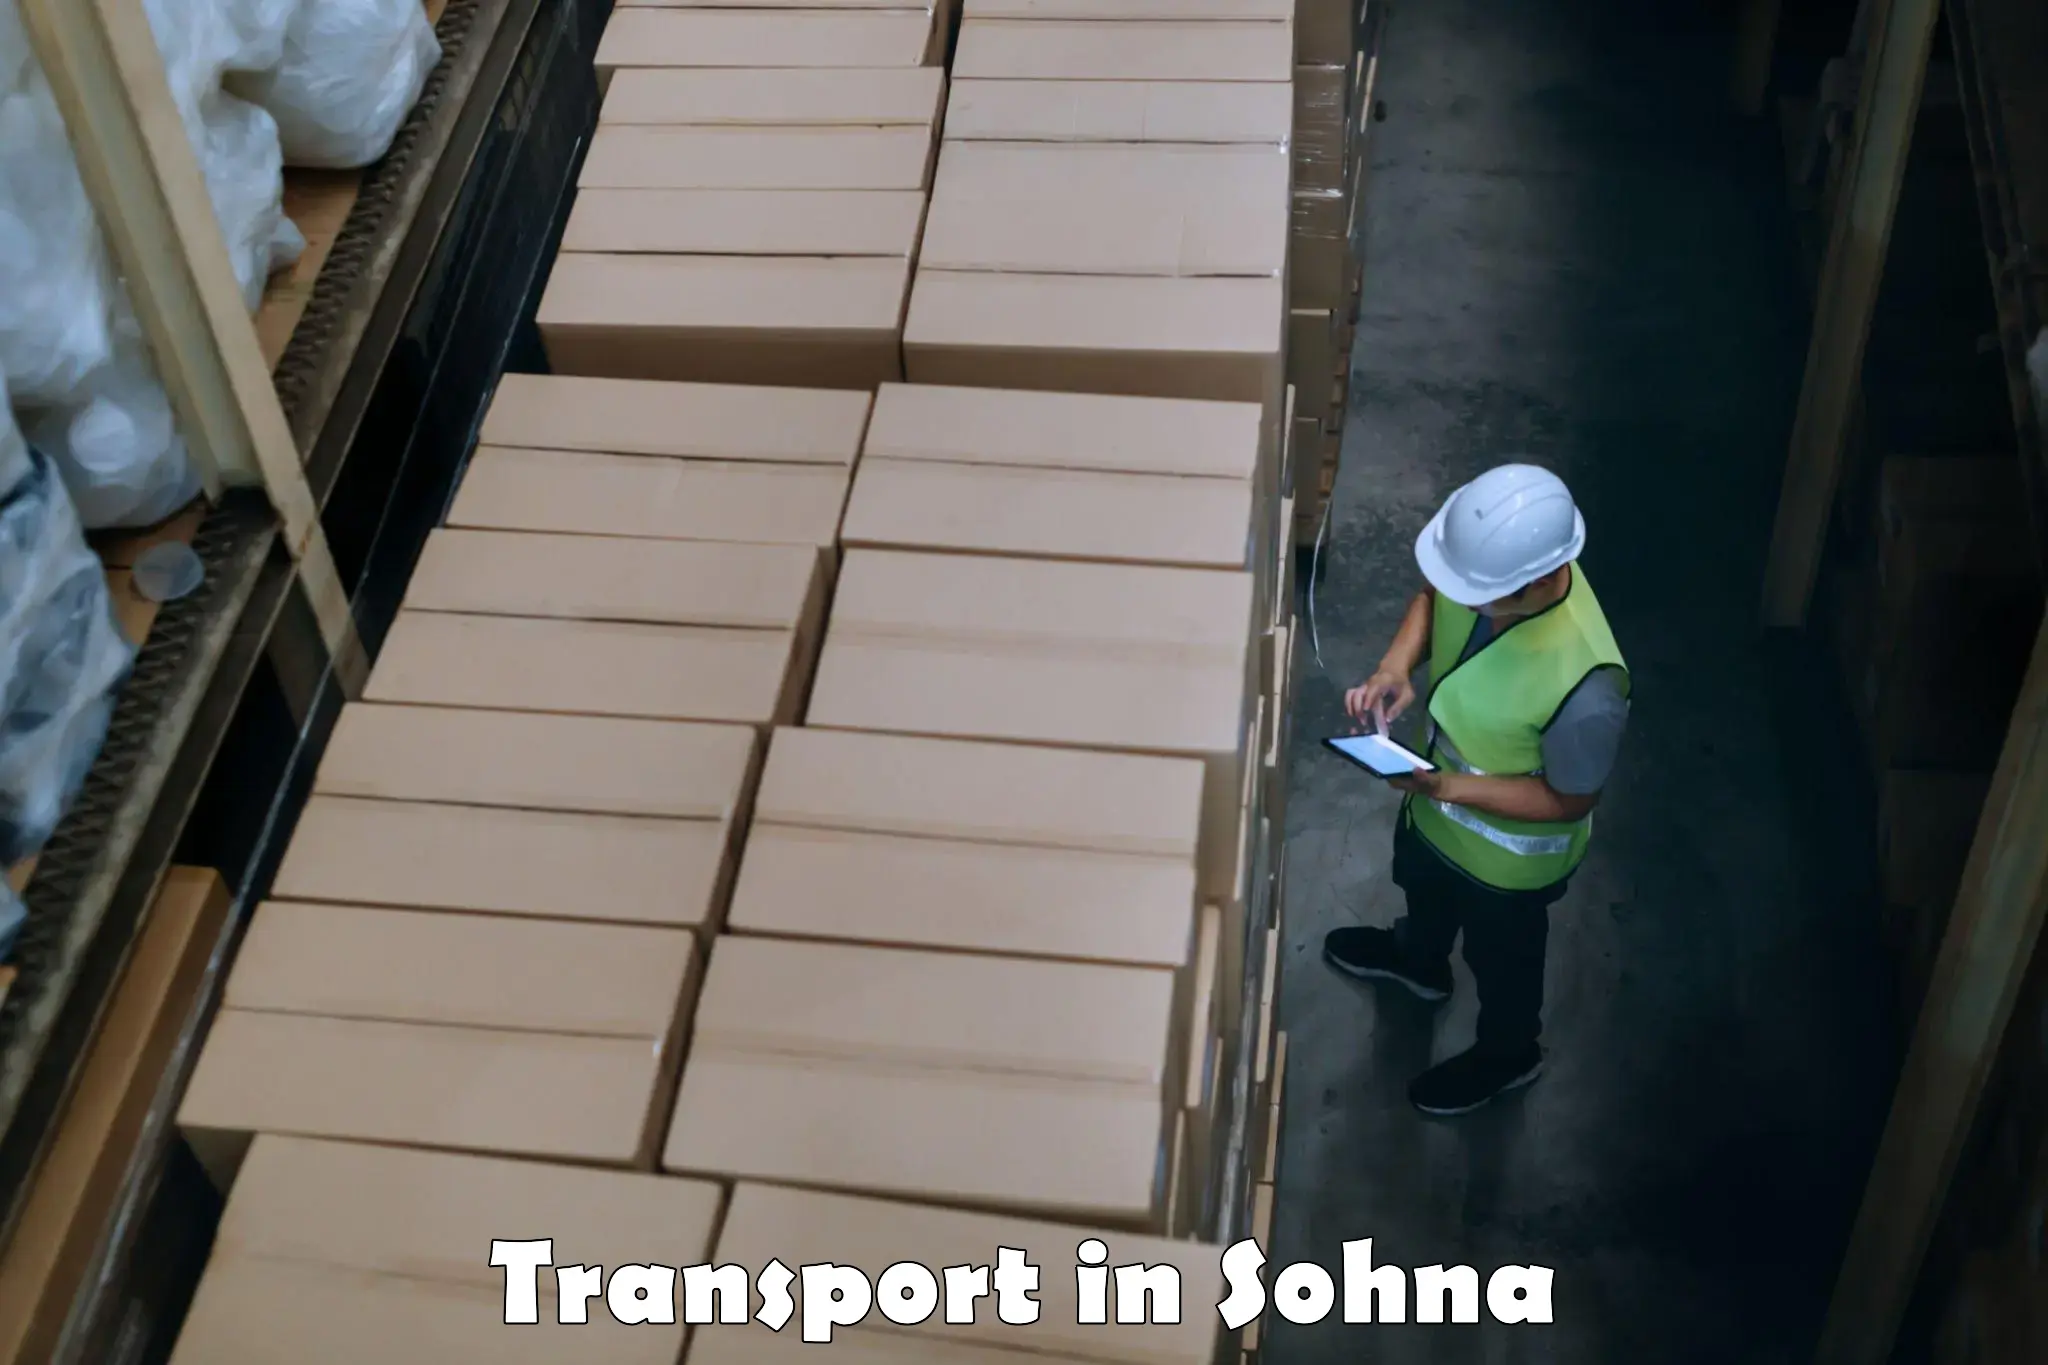 Cargo transport services in Sohna